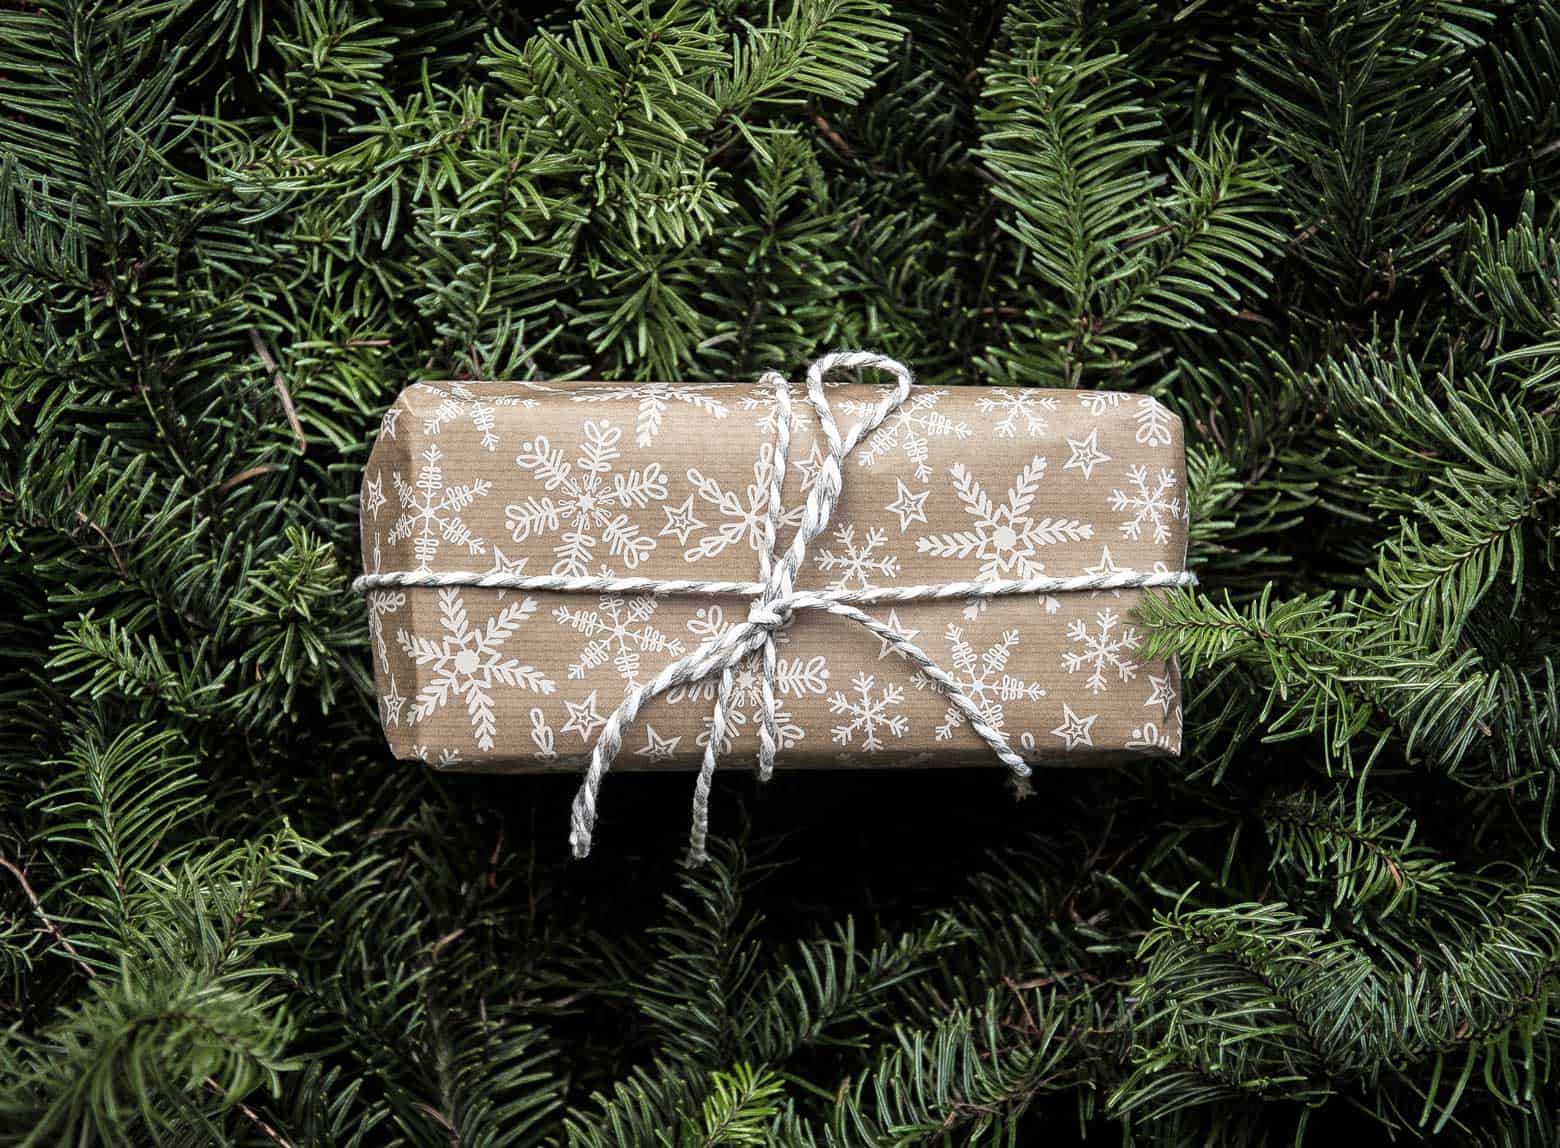 A gift wrapped in brown paper on top of evergreen branches